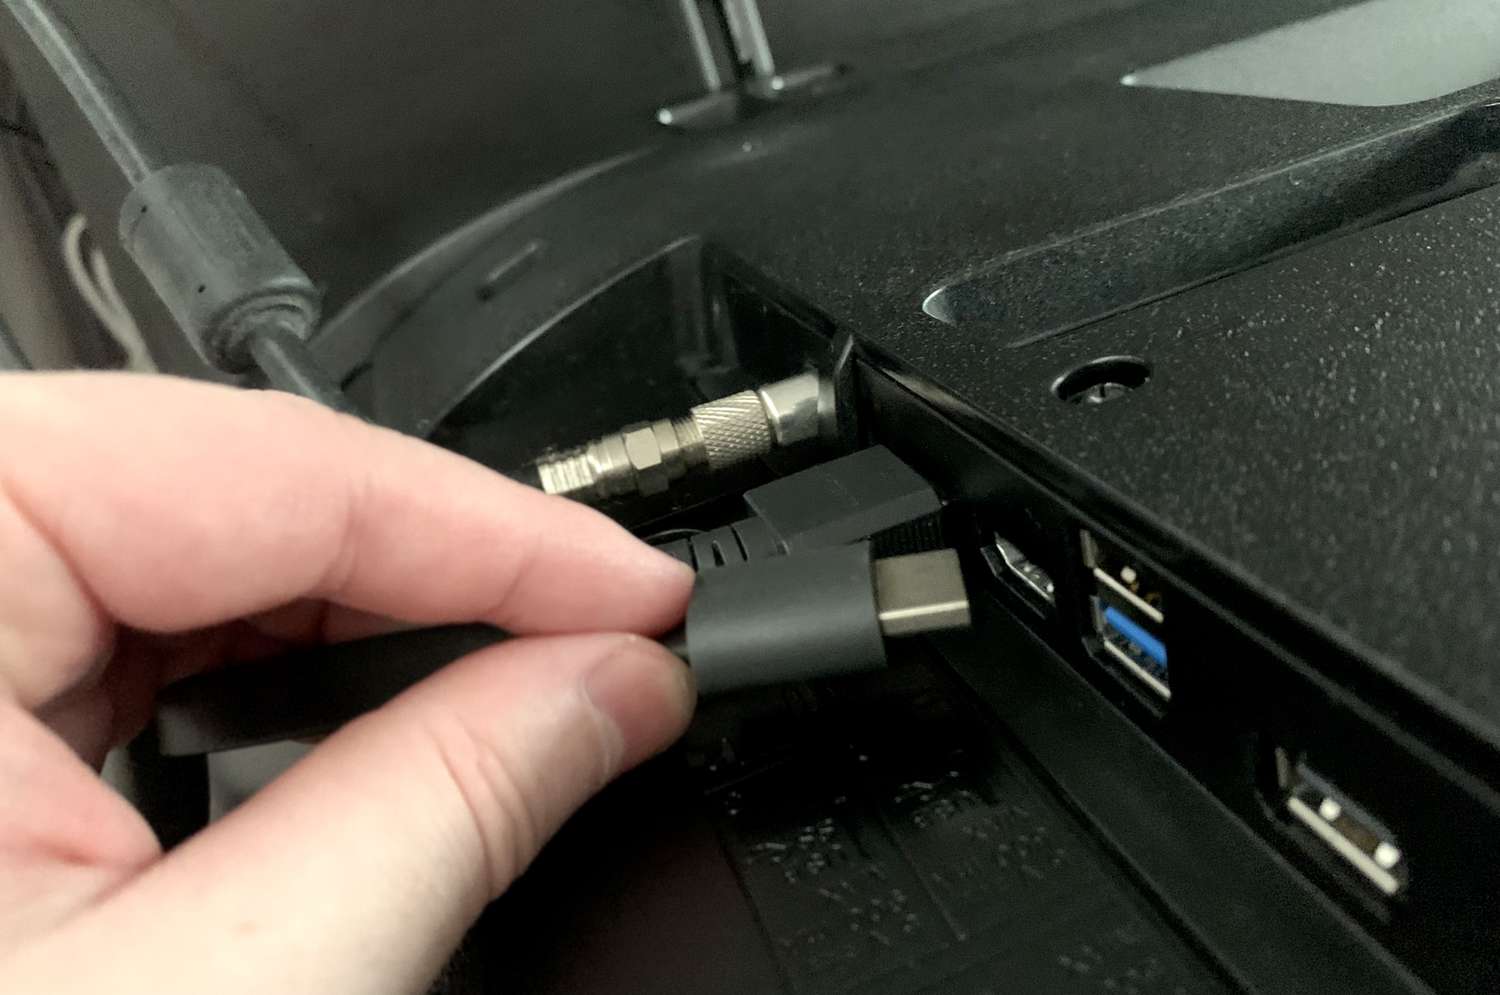 How To Connect Chromecast To Hotspot